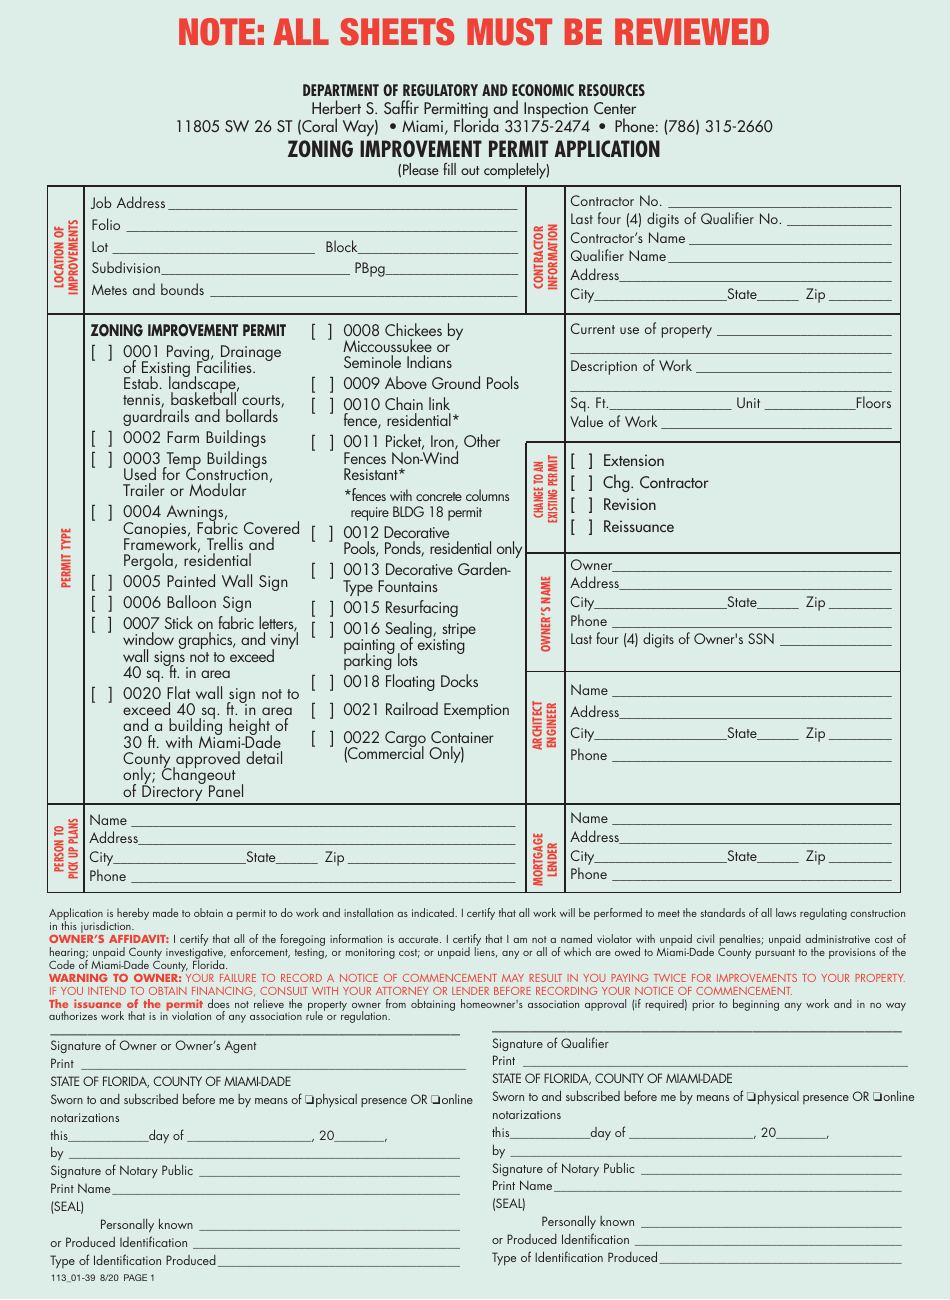 Form 113_01-39 Zoning Improvement Permit Application - Miami-Dade County, Florida, Page 1